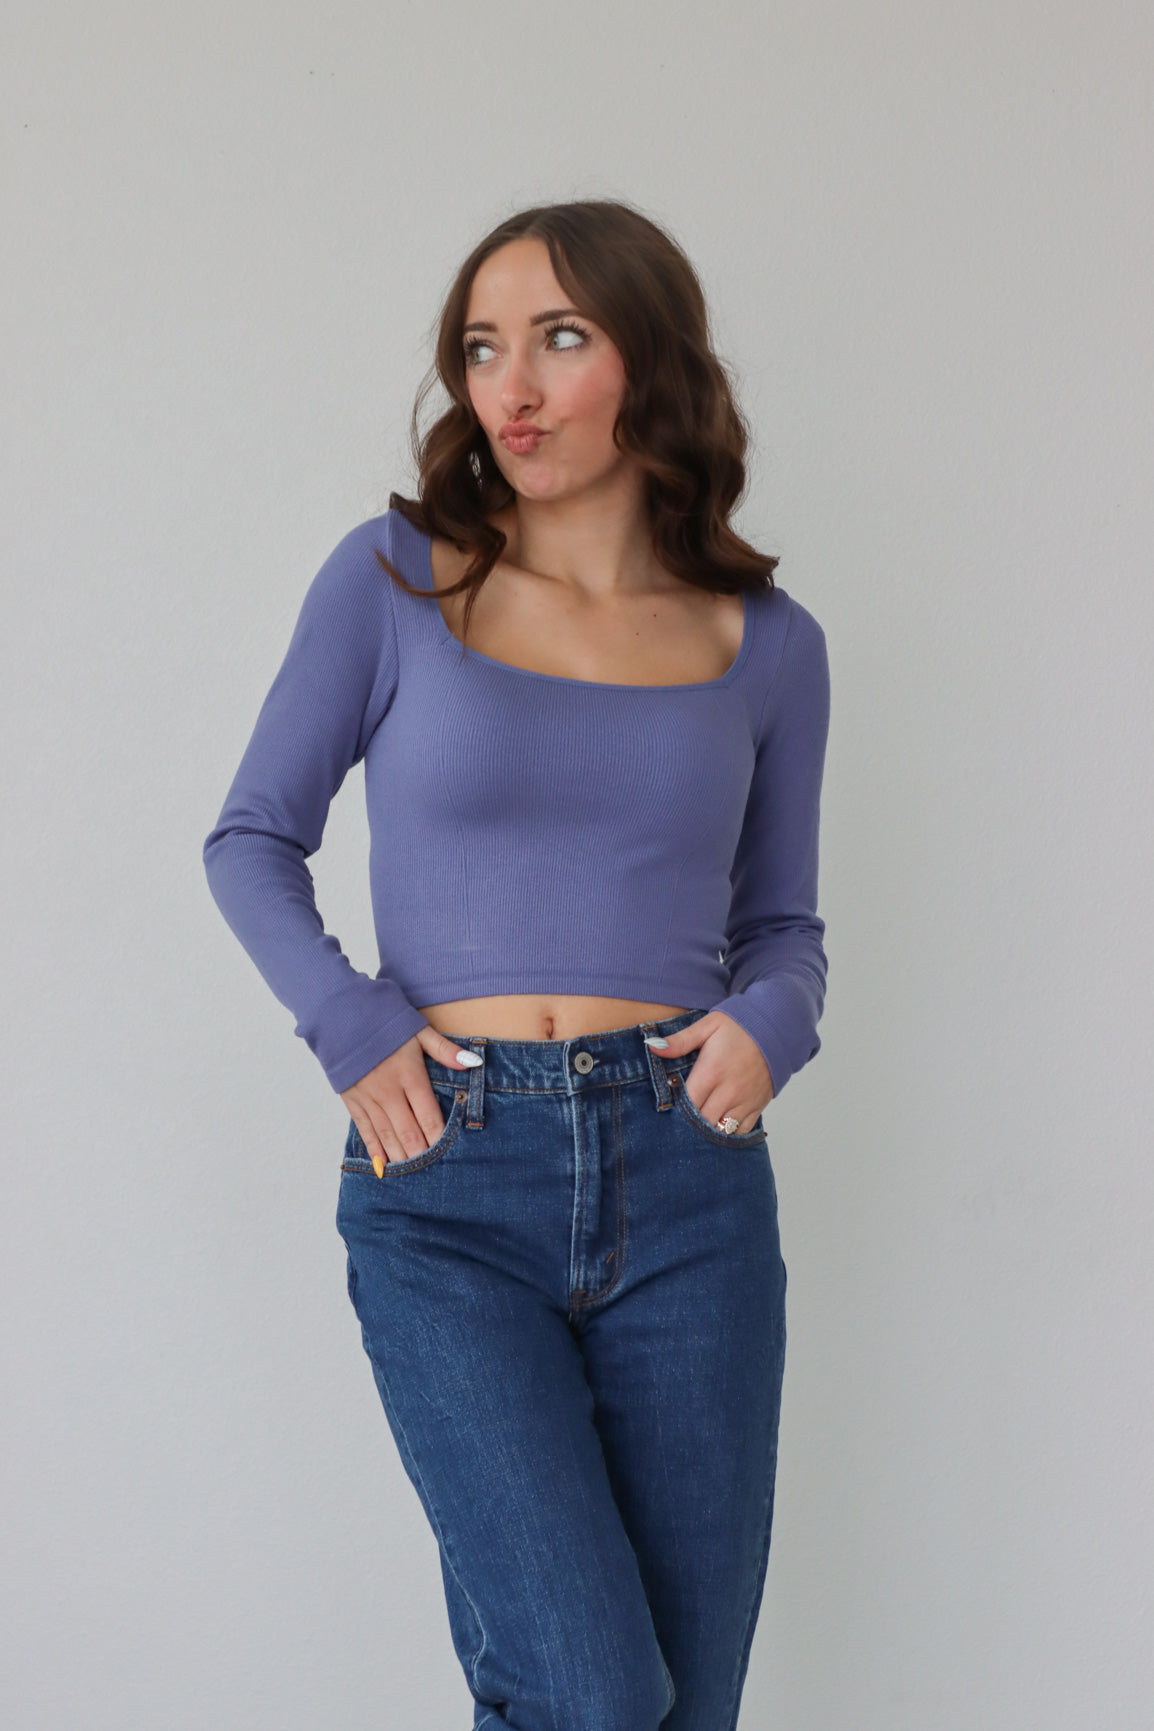 girl wearing purple square neck, long sleeved top